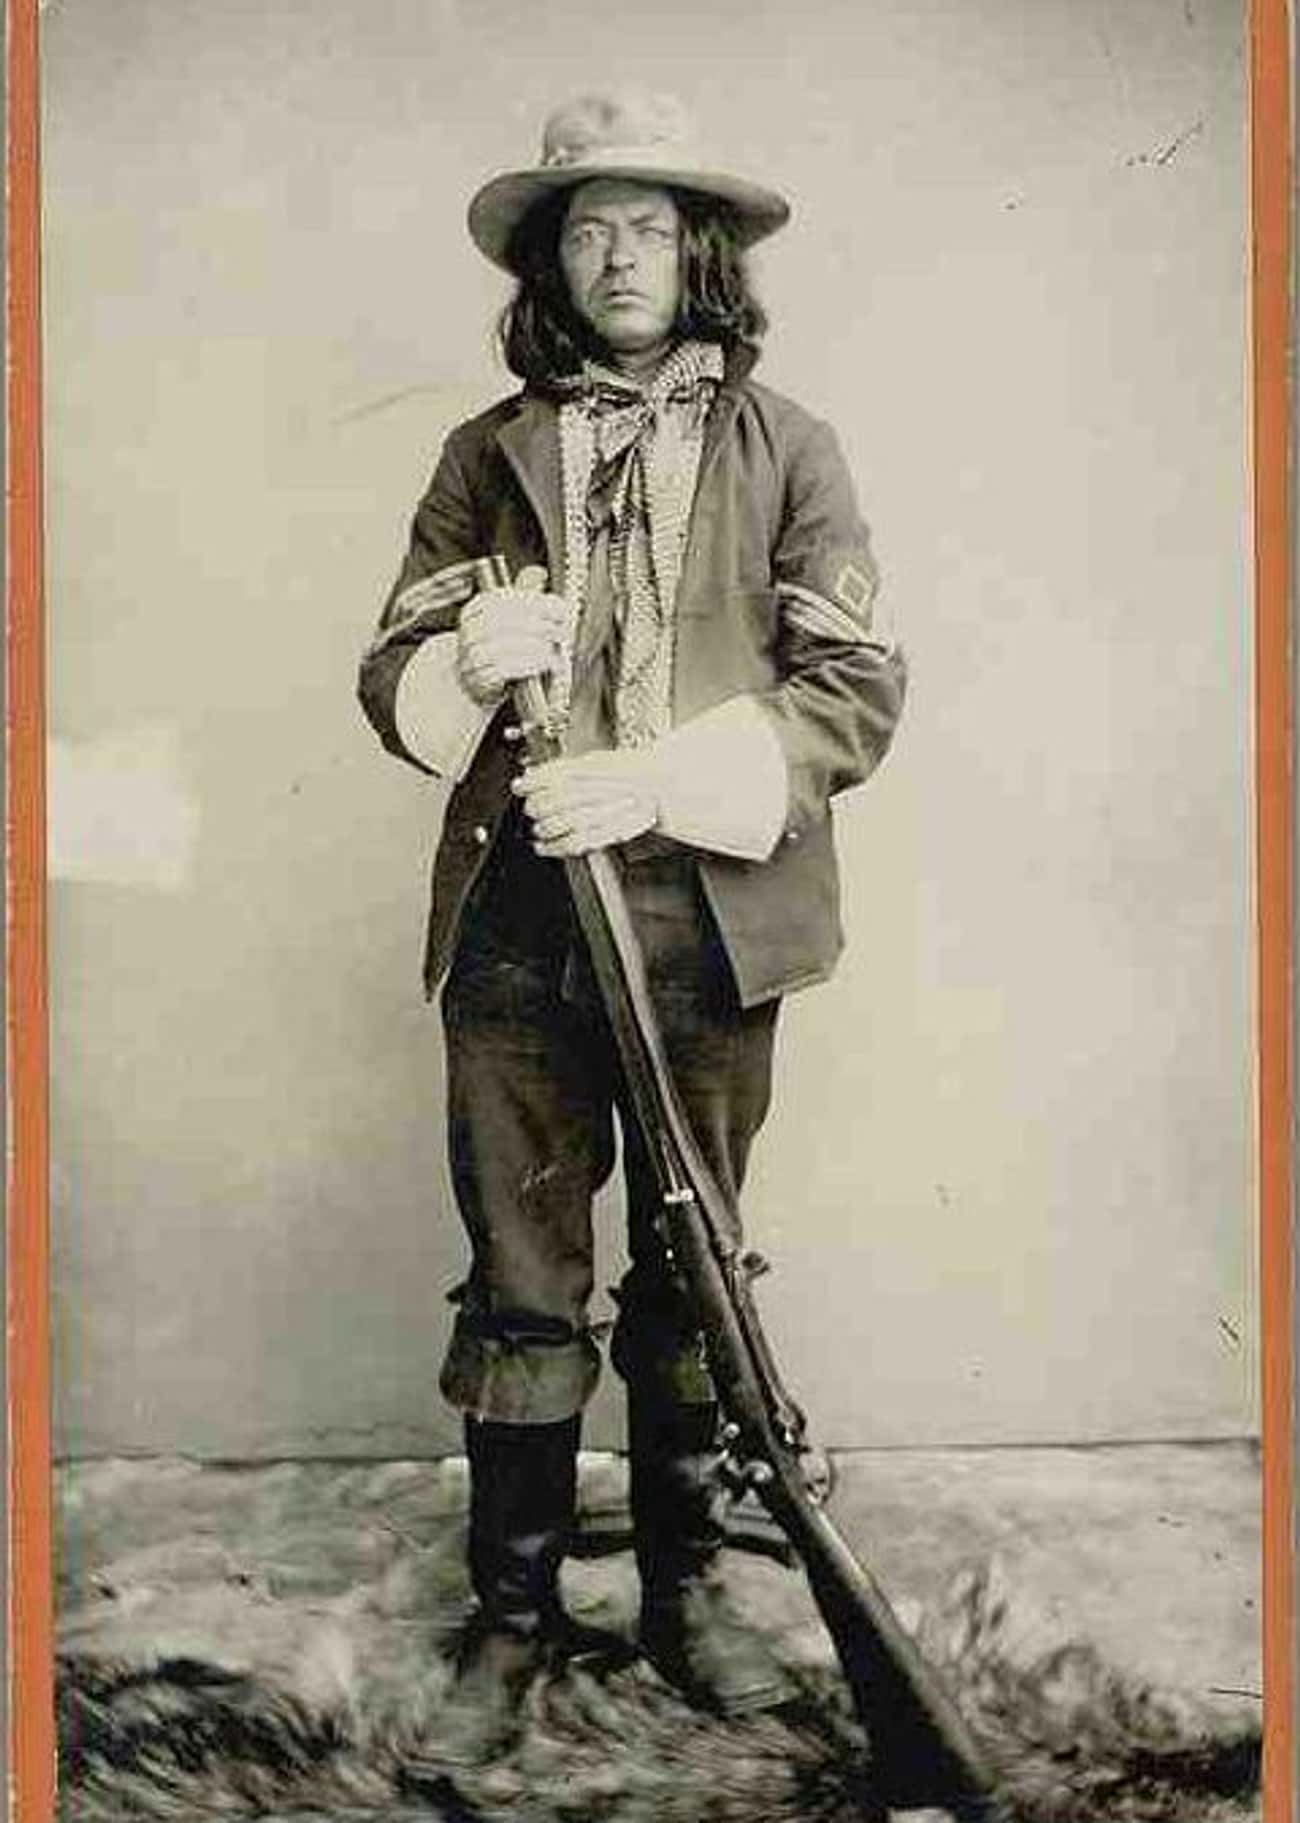 Mickey Free Was Kidnapped By Apaches As A Boy; When The Military Tried To Rescue Him, They Sparked The Chiricahua Wars  